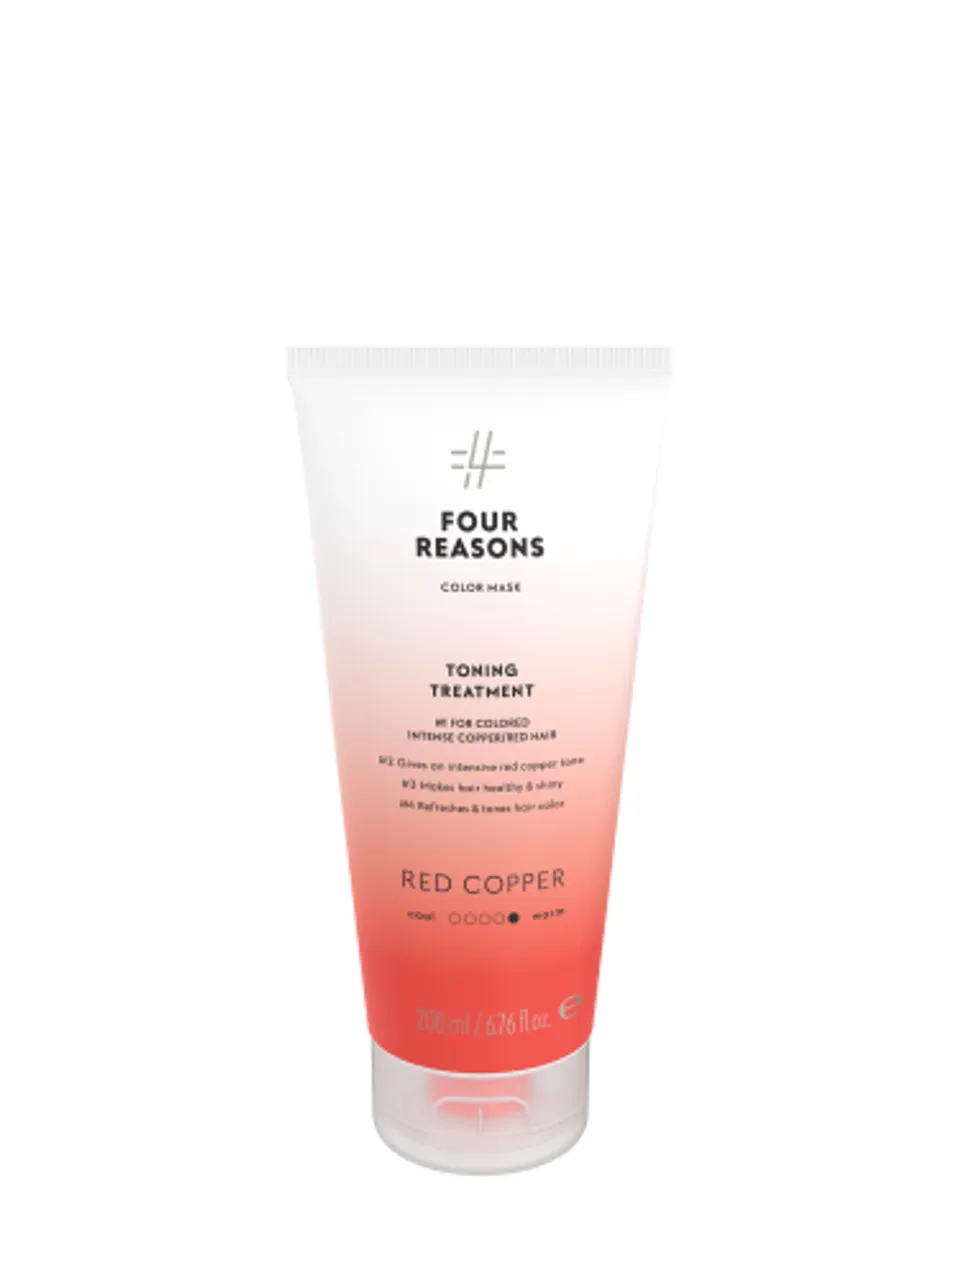 Four Reasons Color Mask Toning Treatment 200ml Red Copper